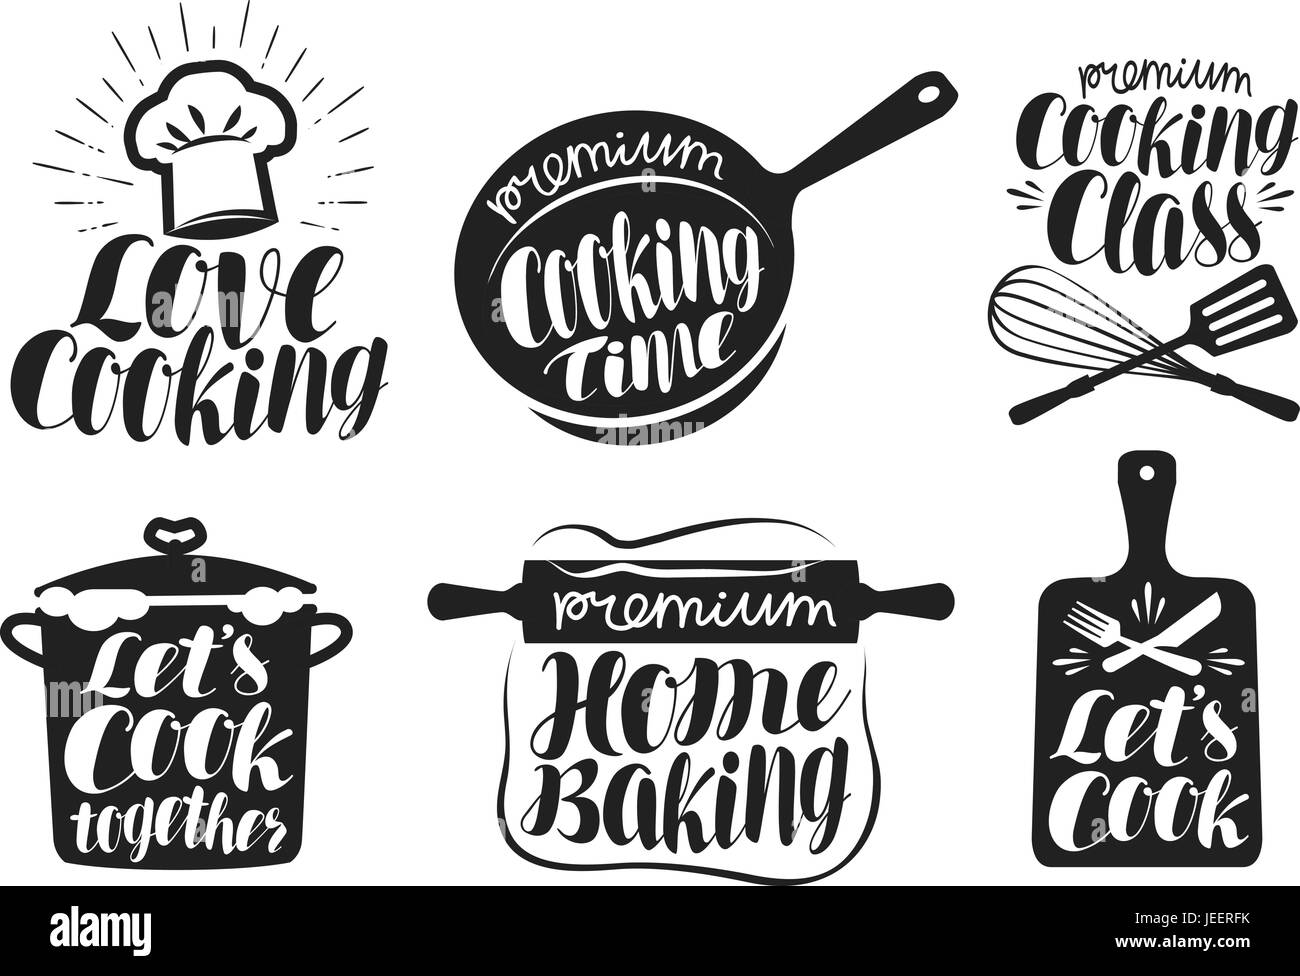 Cooking label set. Cook, food, eat, home baking icon or logo. Lettering, calligraphy vector illustration Stock Vector